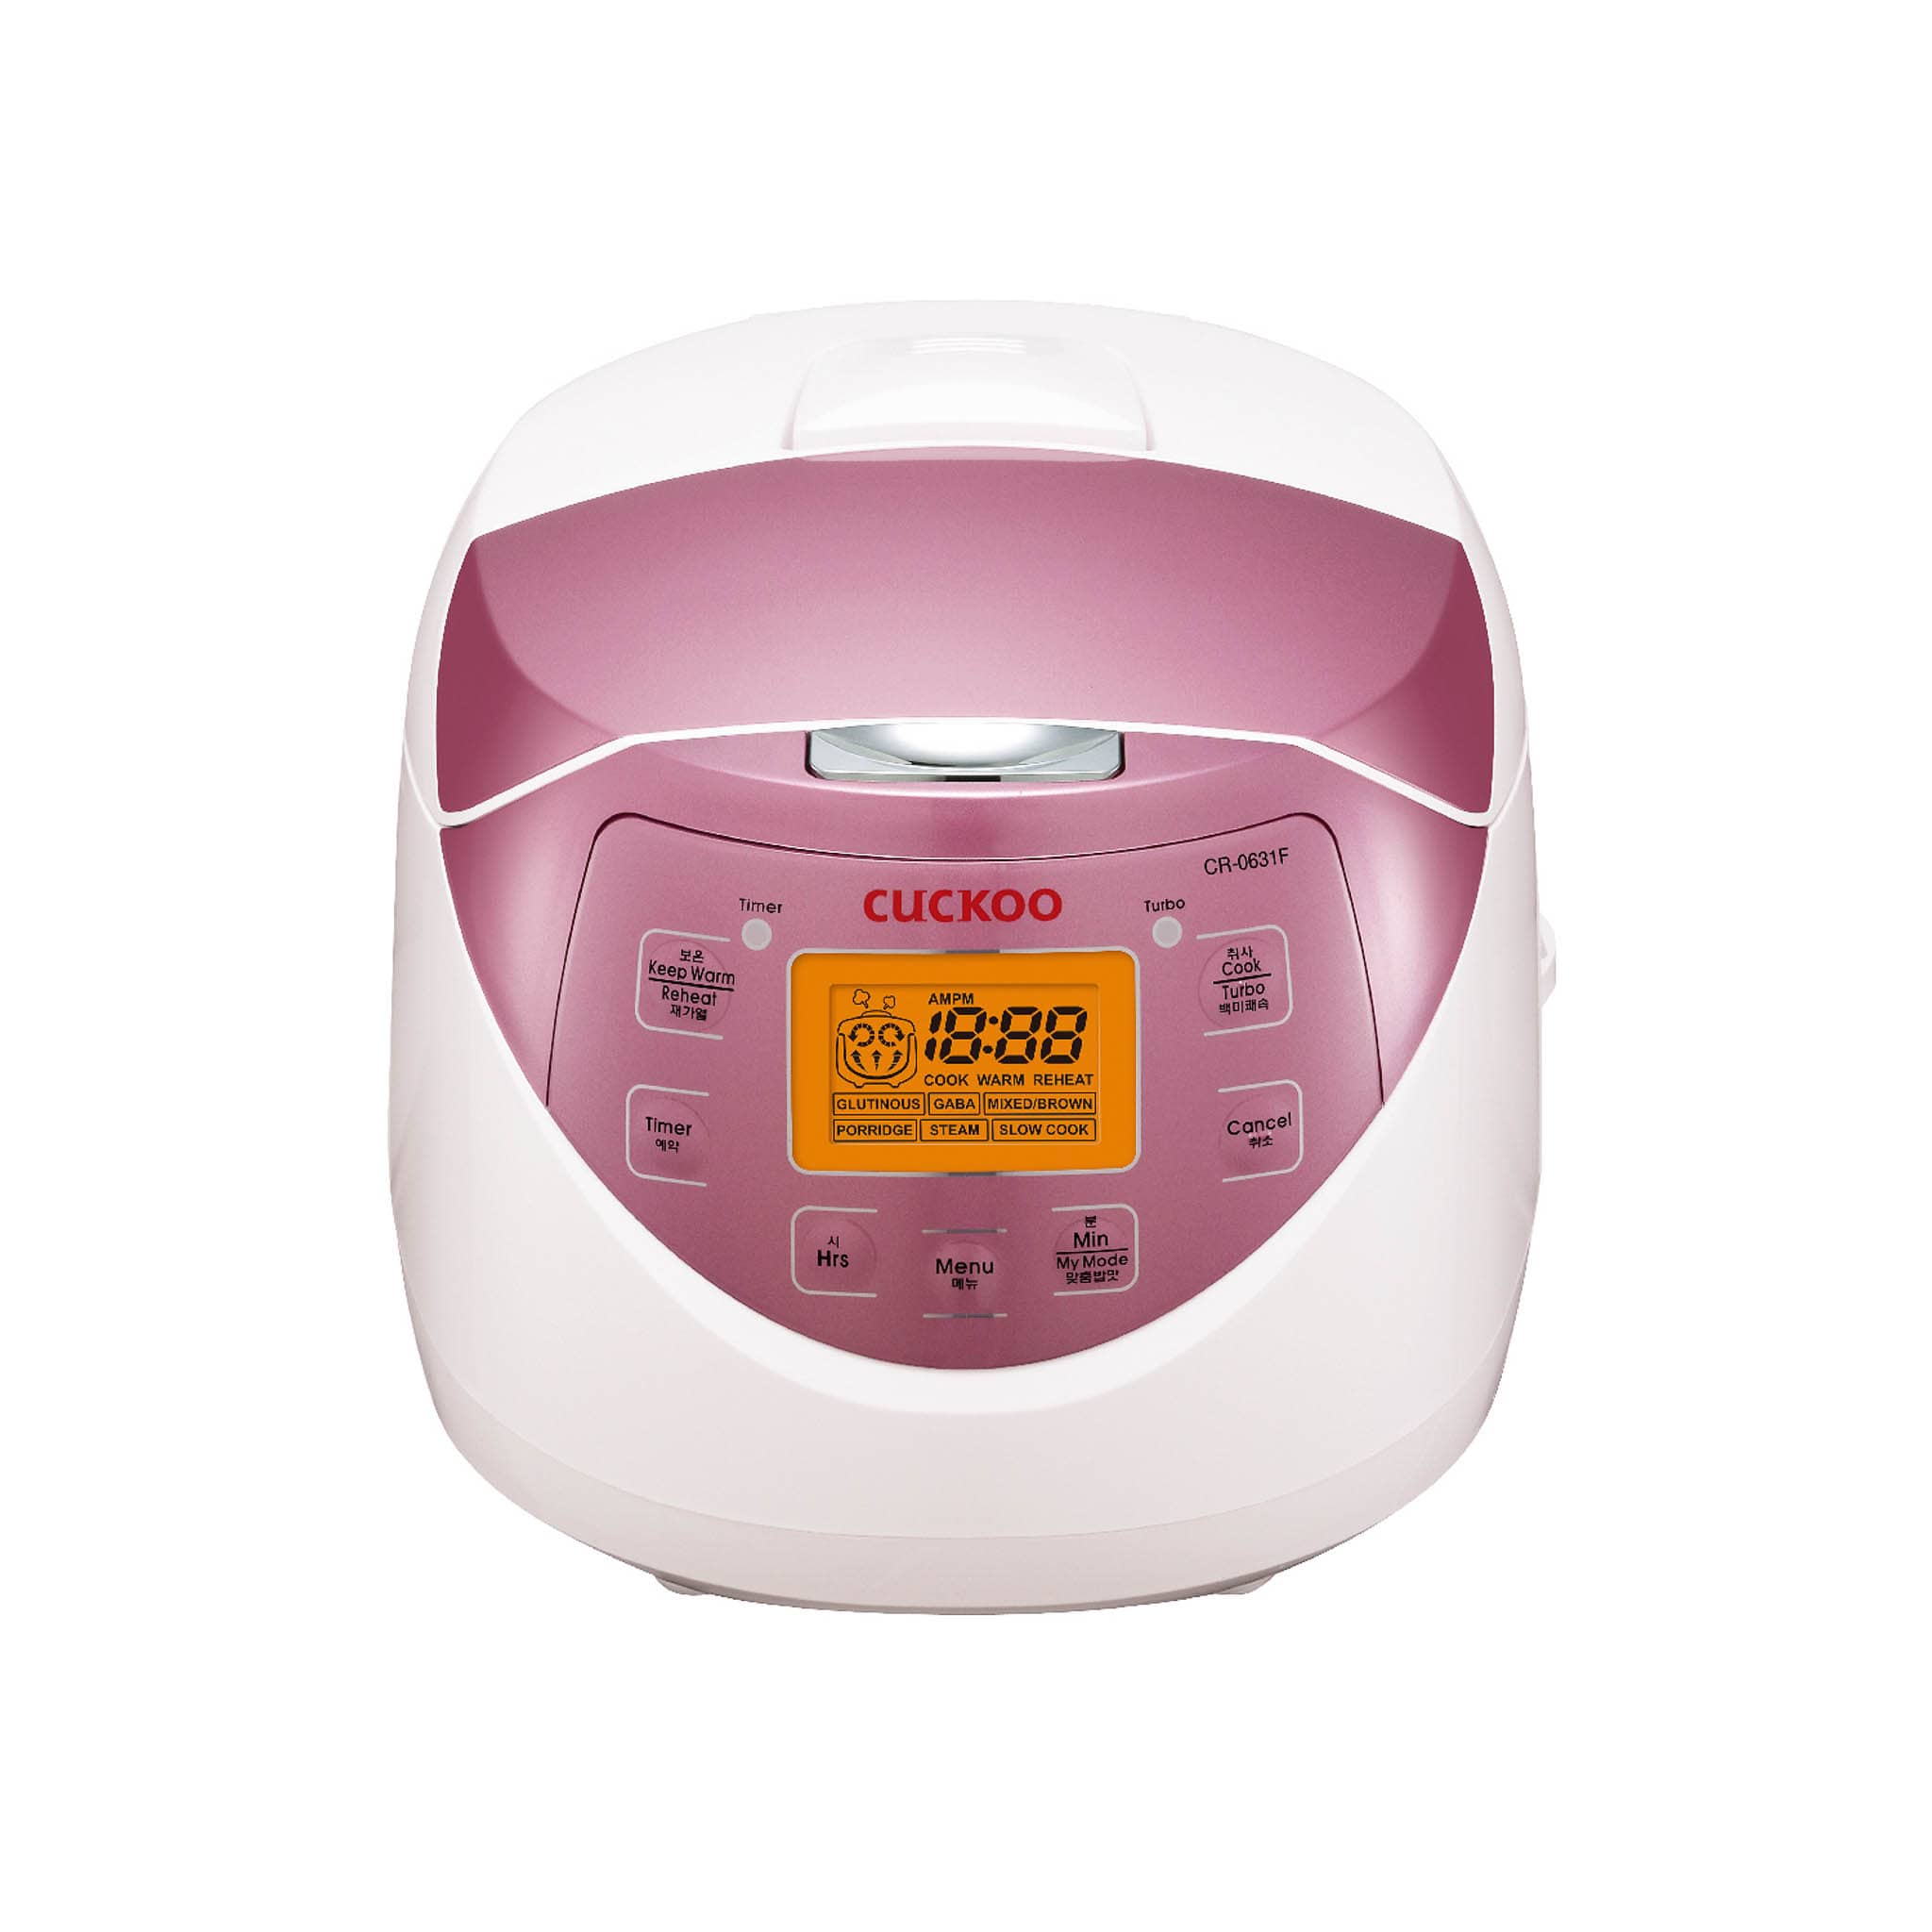 Cuckoo Electric Rice Cooker 1L - 6 Persons